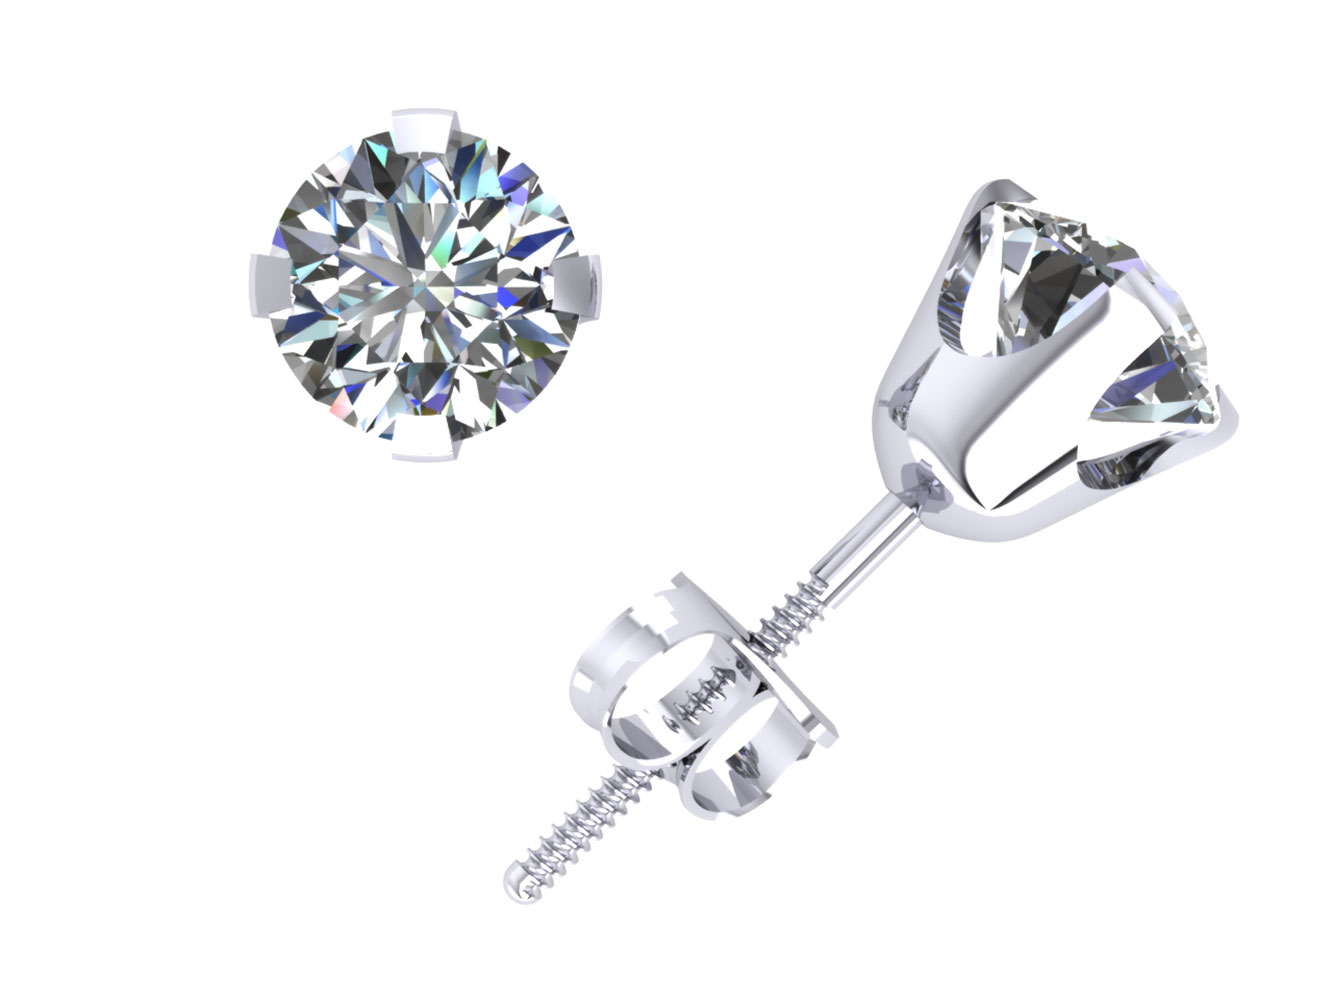 Jewel We Sell 1.25CT Round Cut Diamond Solitaire Stud Earrings 14k White or Yellow Gold 4Prong ScrewBack H SI2